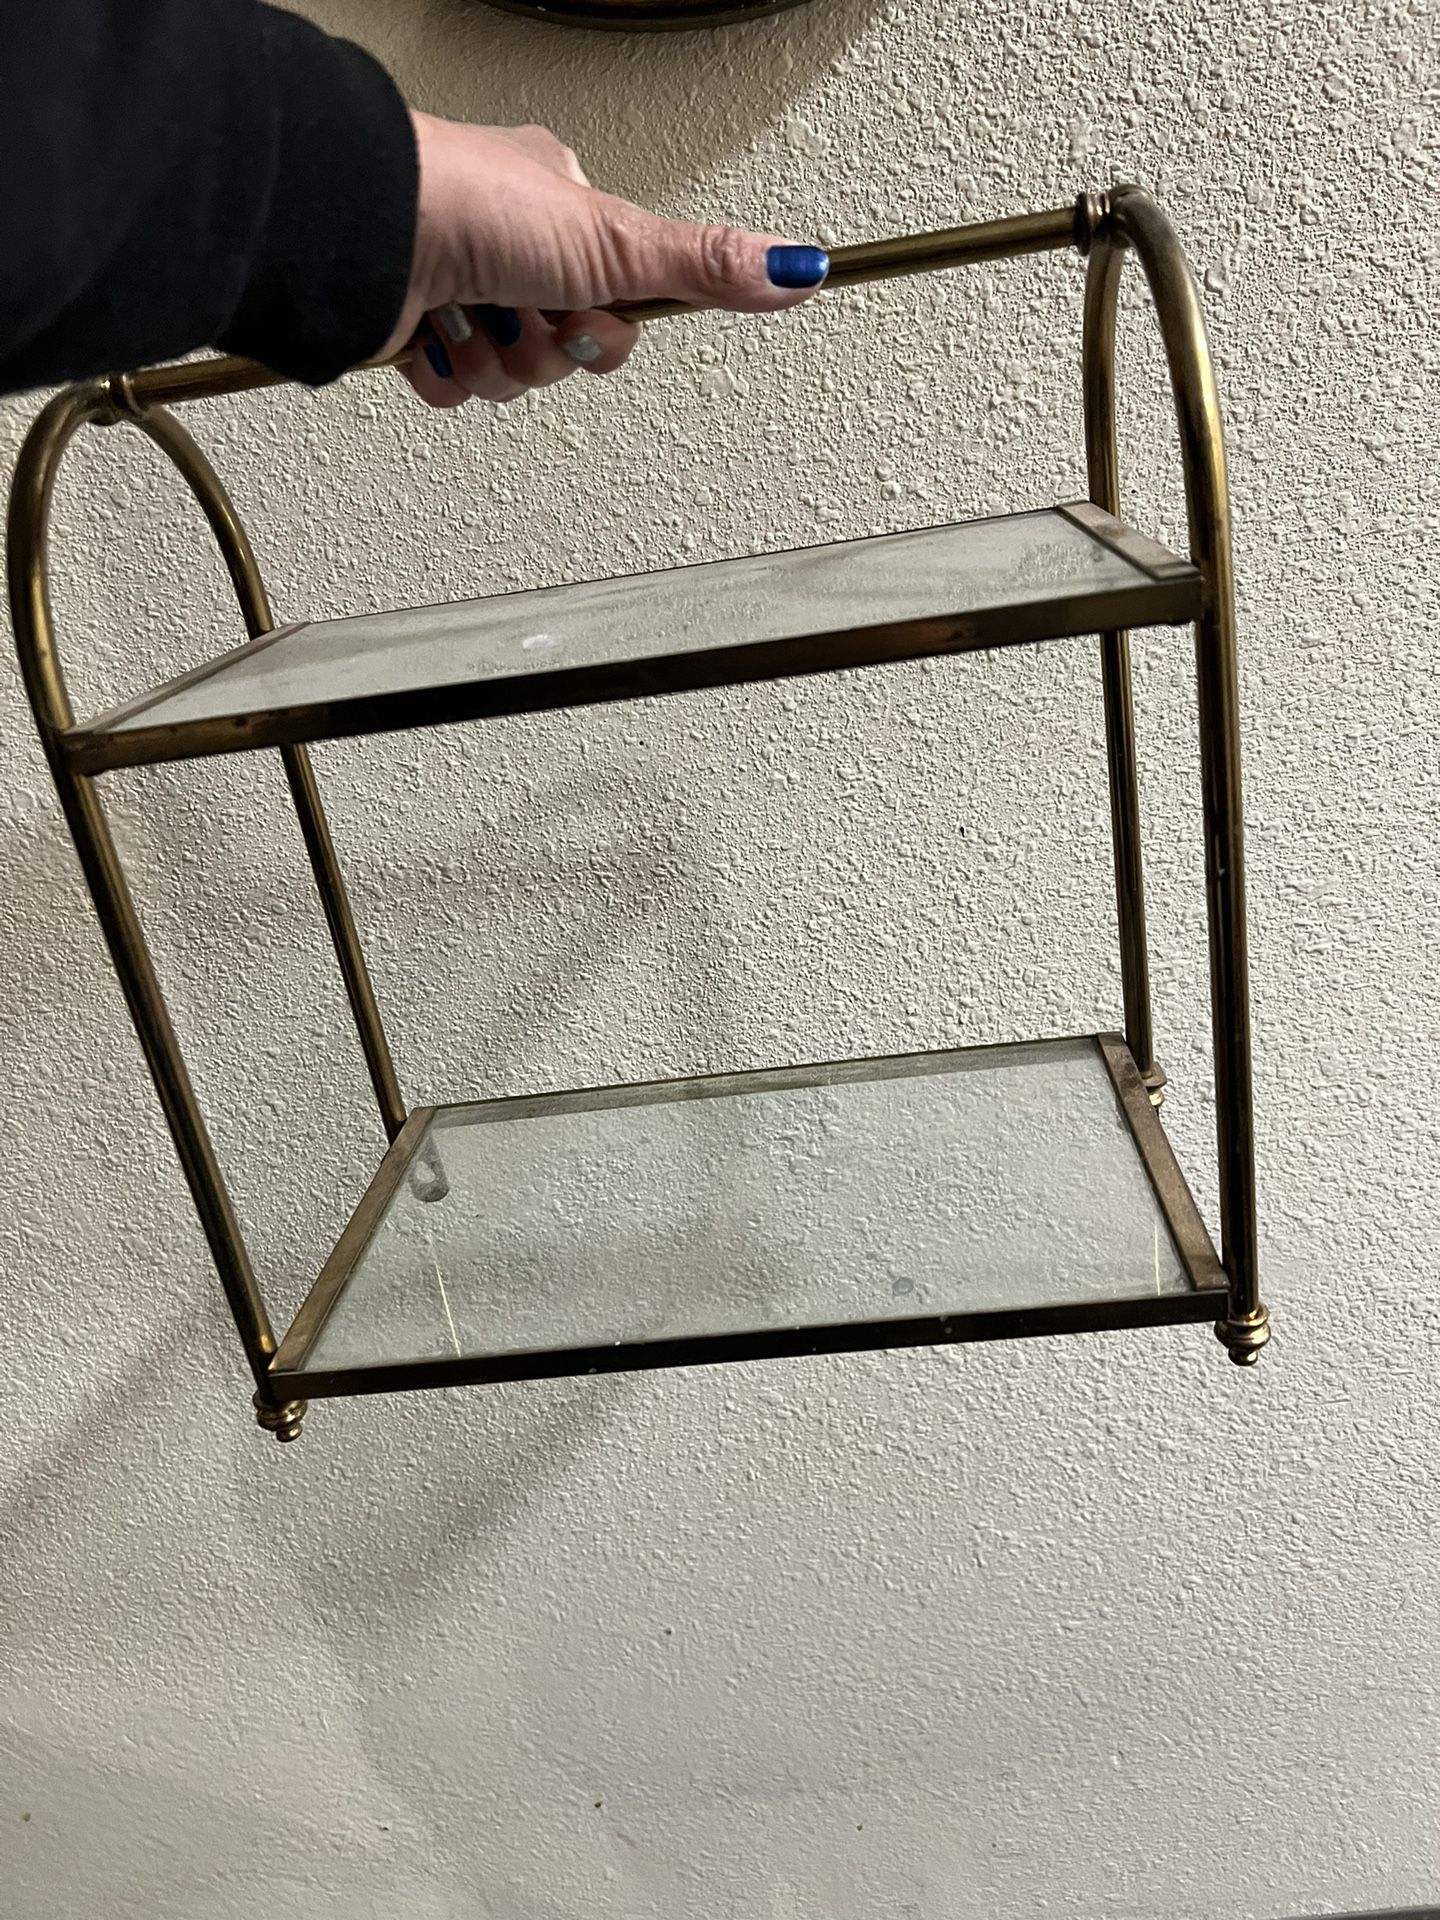 $25 Vintage Two-Tier Glass and Gold Metal Shelf